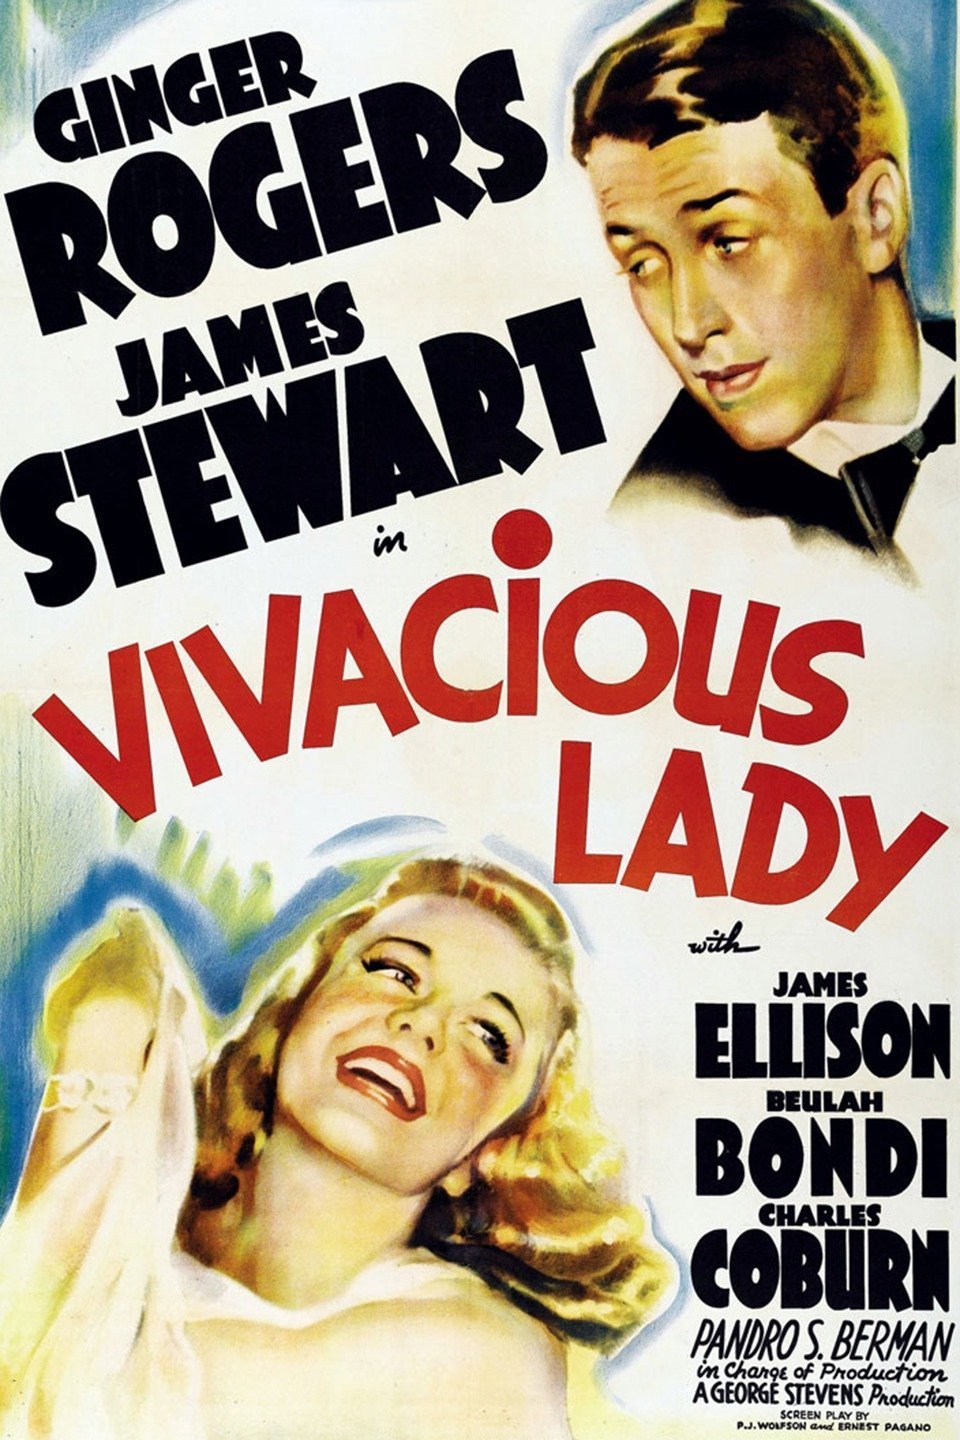 Poster of the movie Vivacious Lady